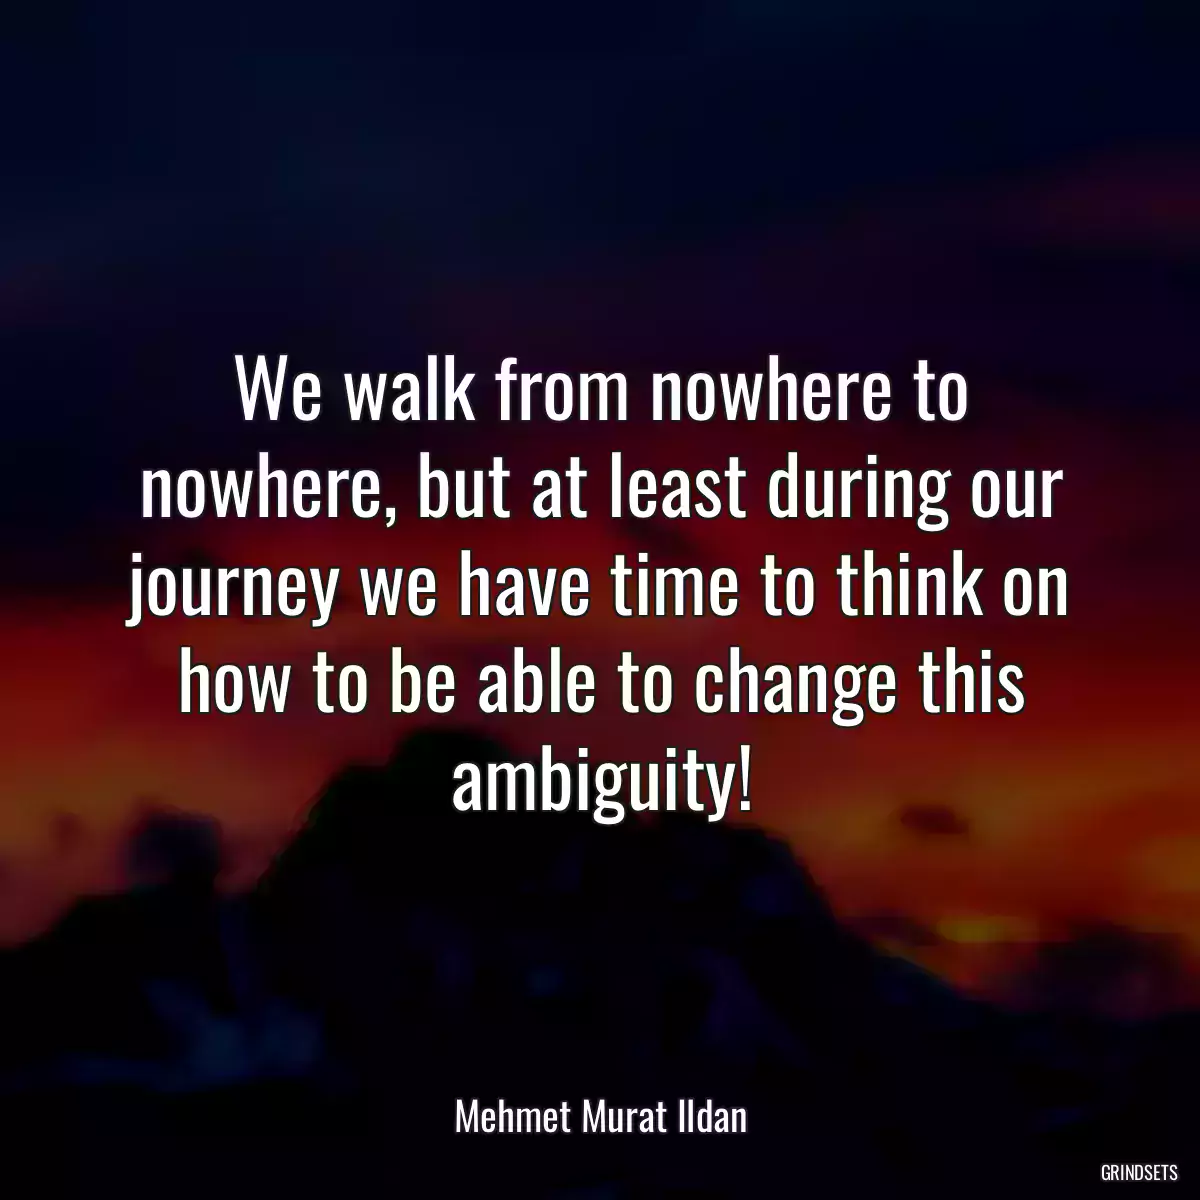 We walk from nowhere to nowhere, but at least during our journey we have time to think on how to be able to change this ambiguity!